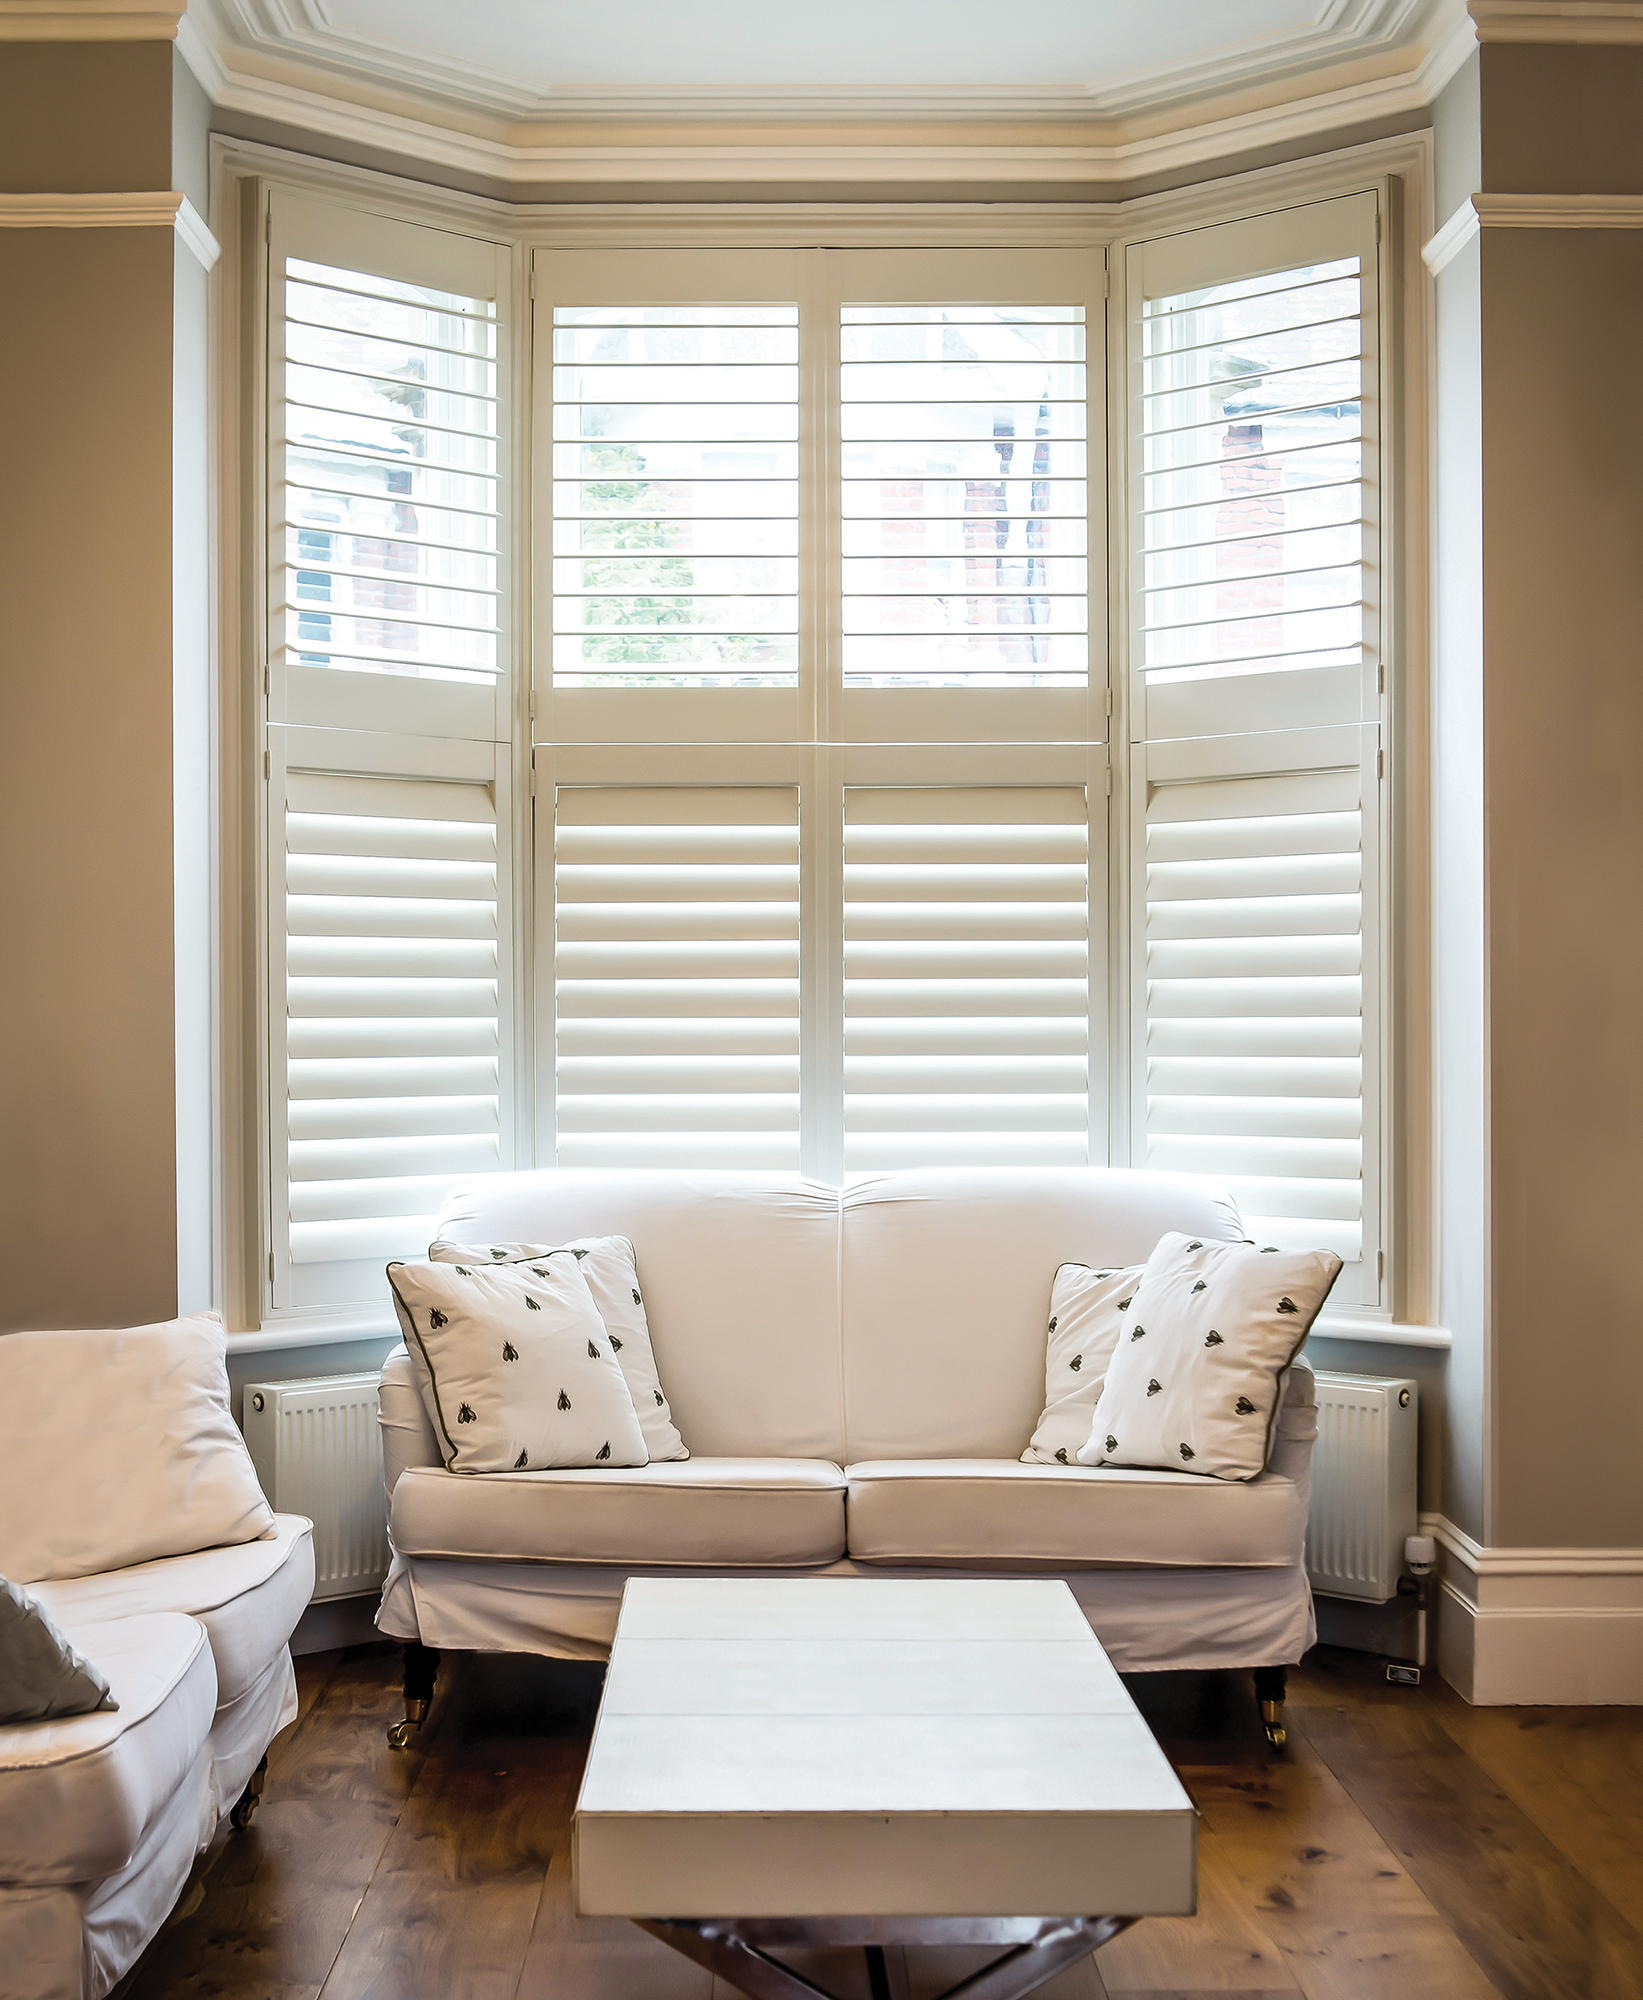 Bay Window Shutters Shutter Blinds For Square, Curved Windows